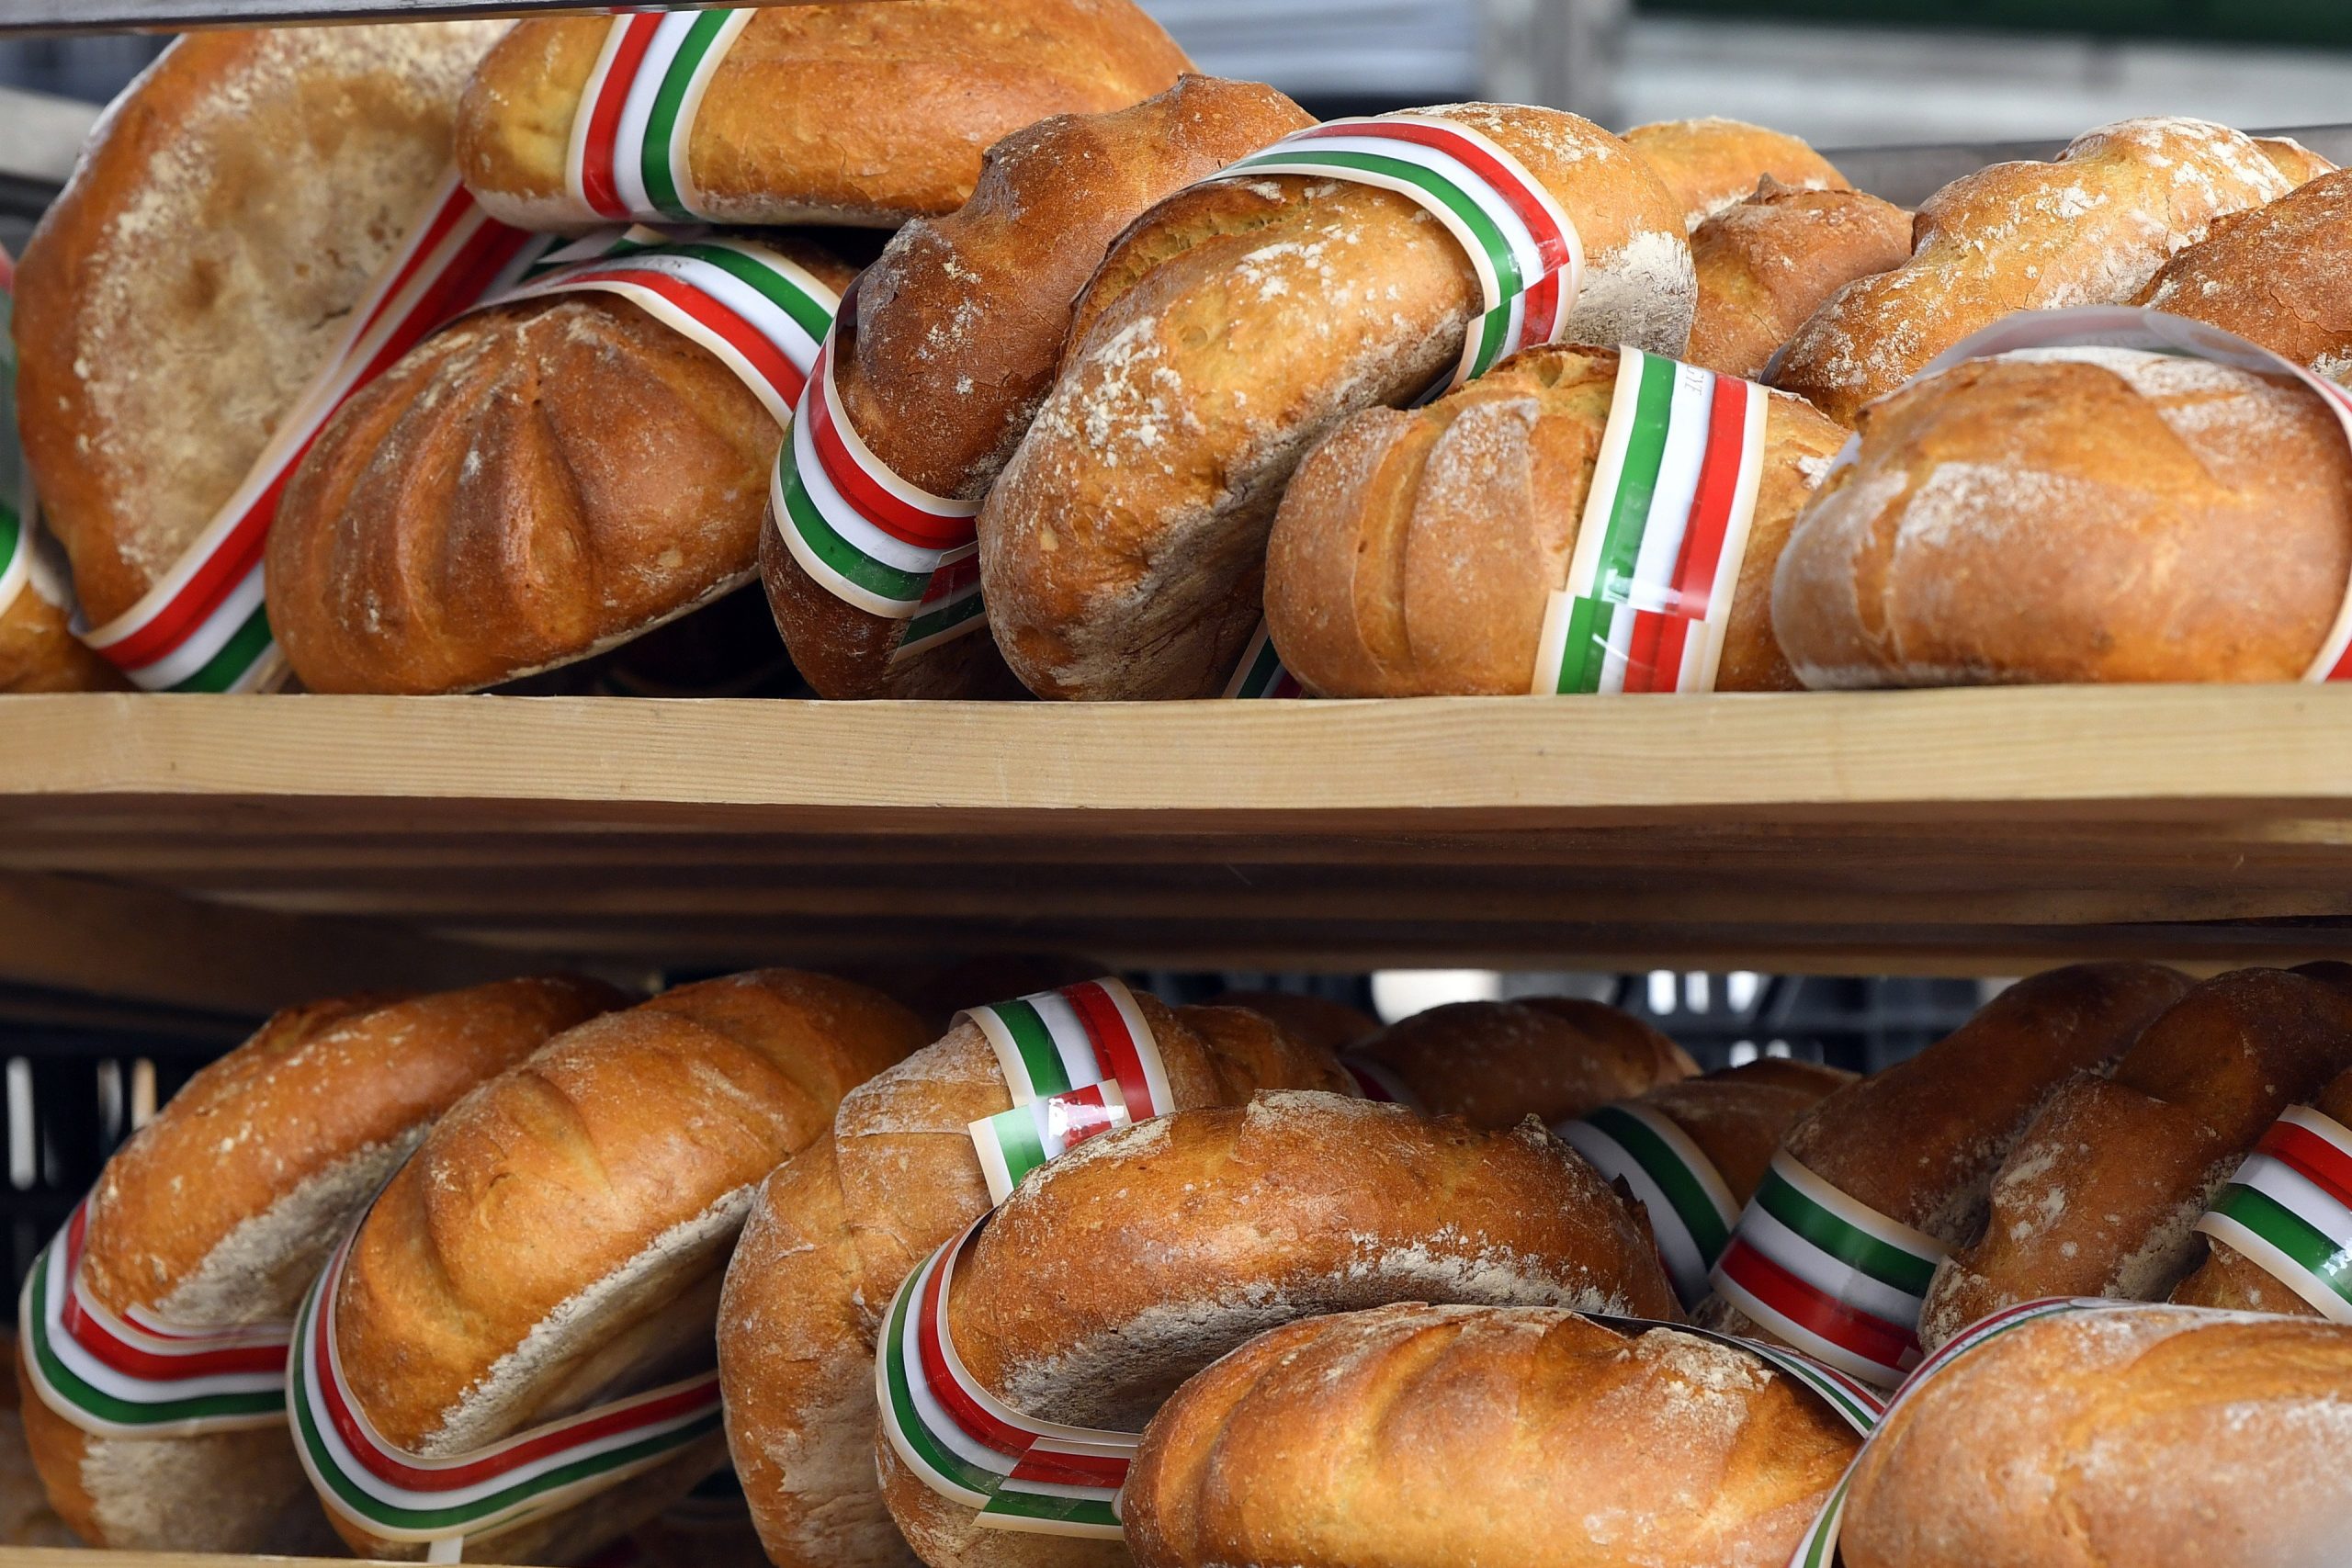 Bread Prices in Hungary Could Surpass €2 per Kilo by Summer